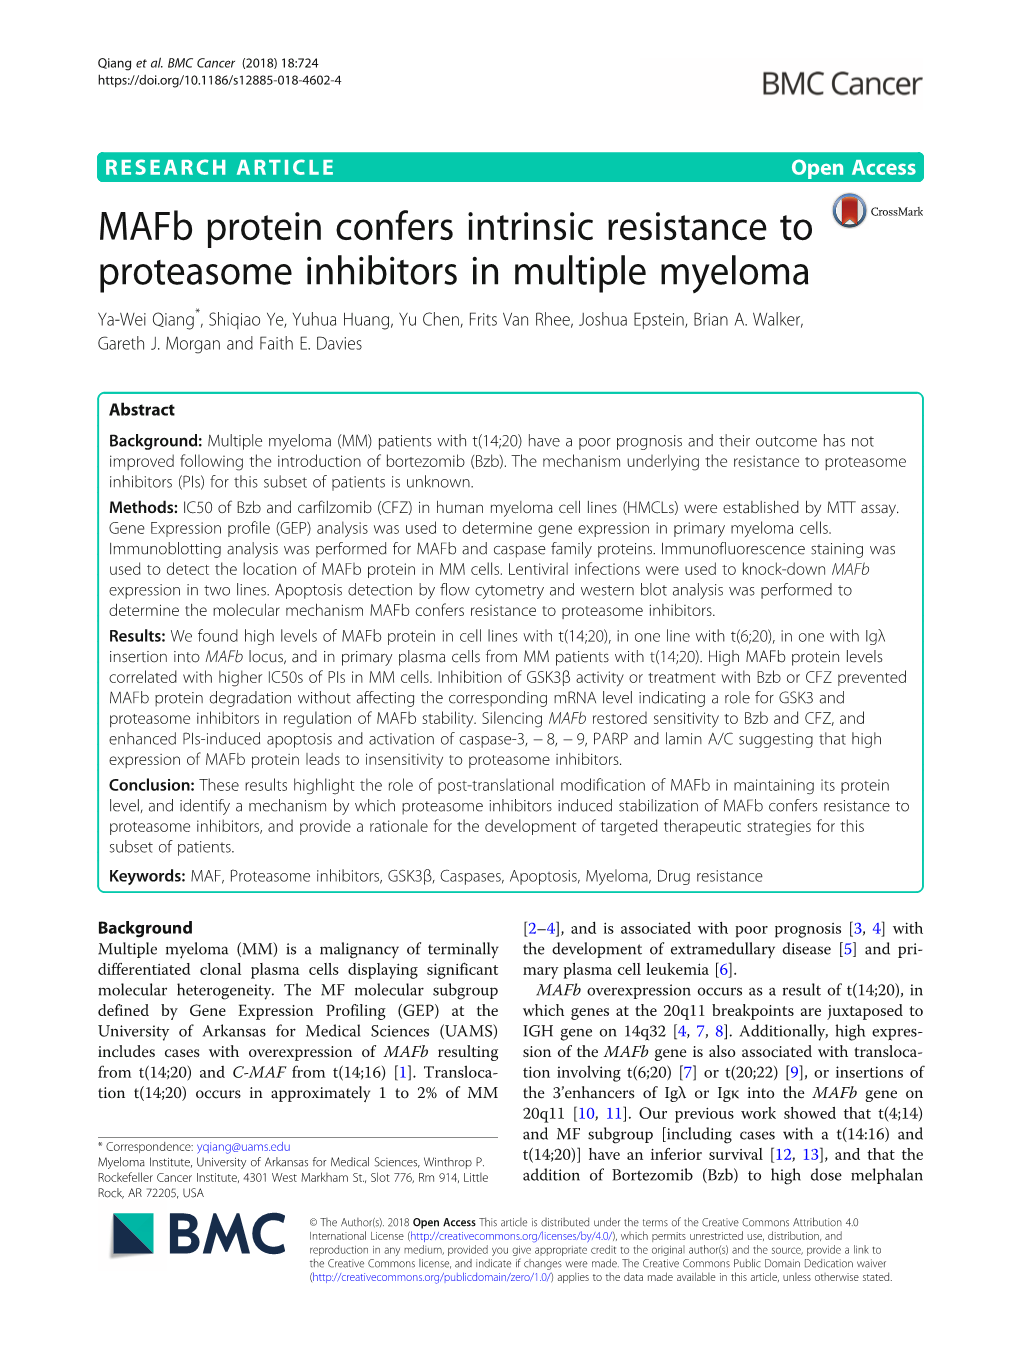 Mafb Protein Confers Intrinsic Resistance to Proteasome Inhibitors in Multiple Myeloma